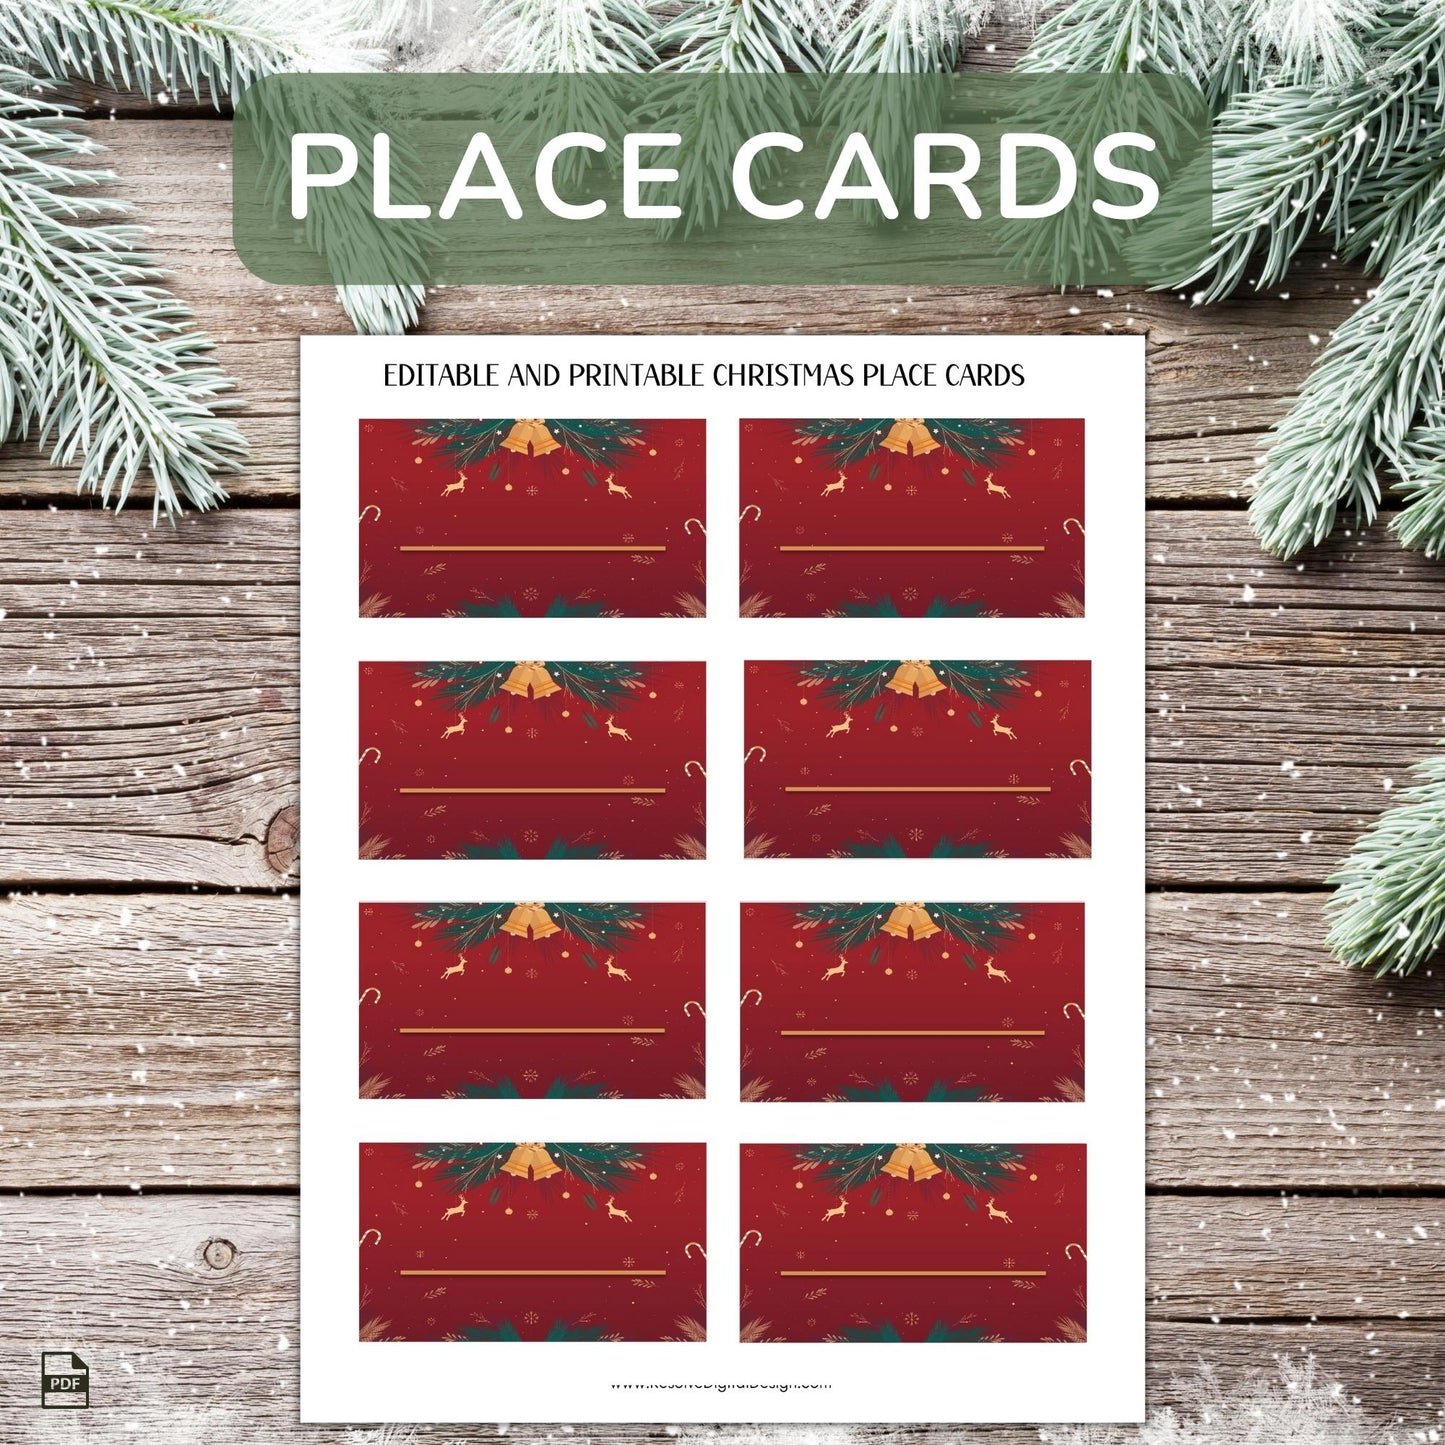 Printable Holiday Card Set - Red Festive